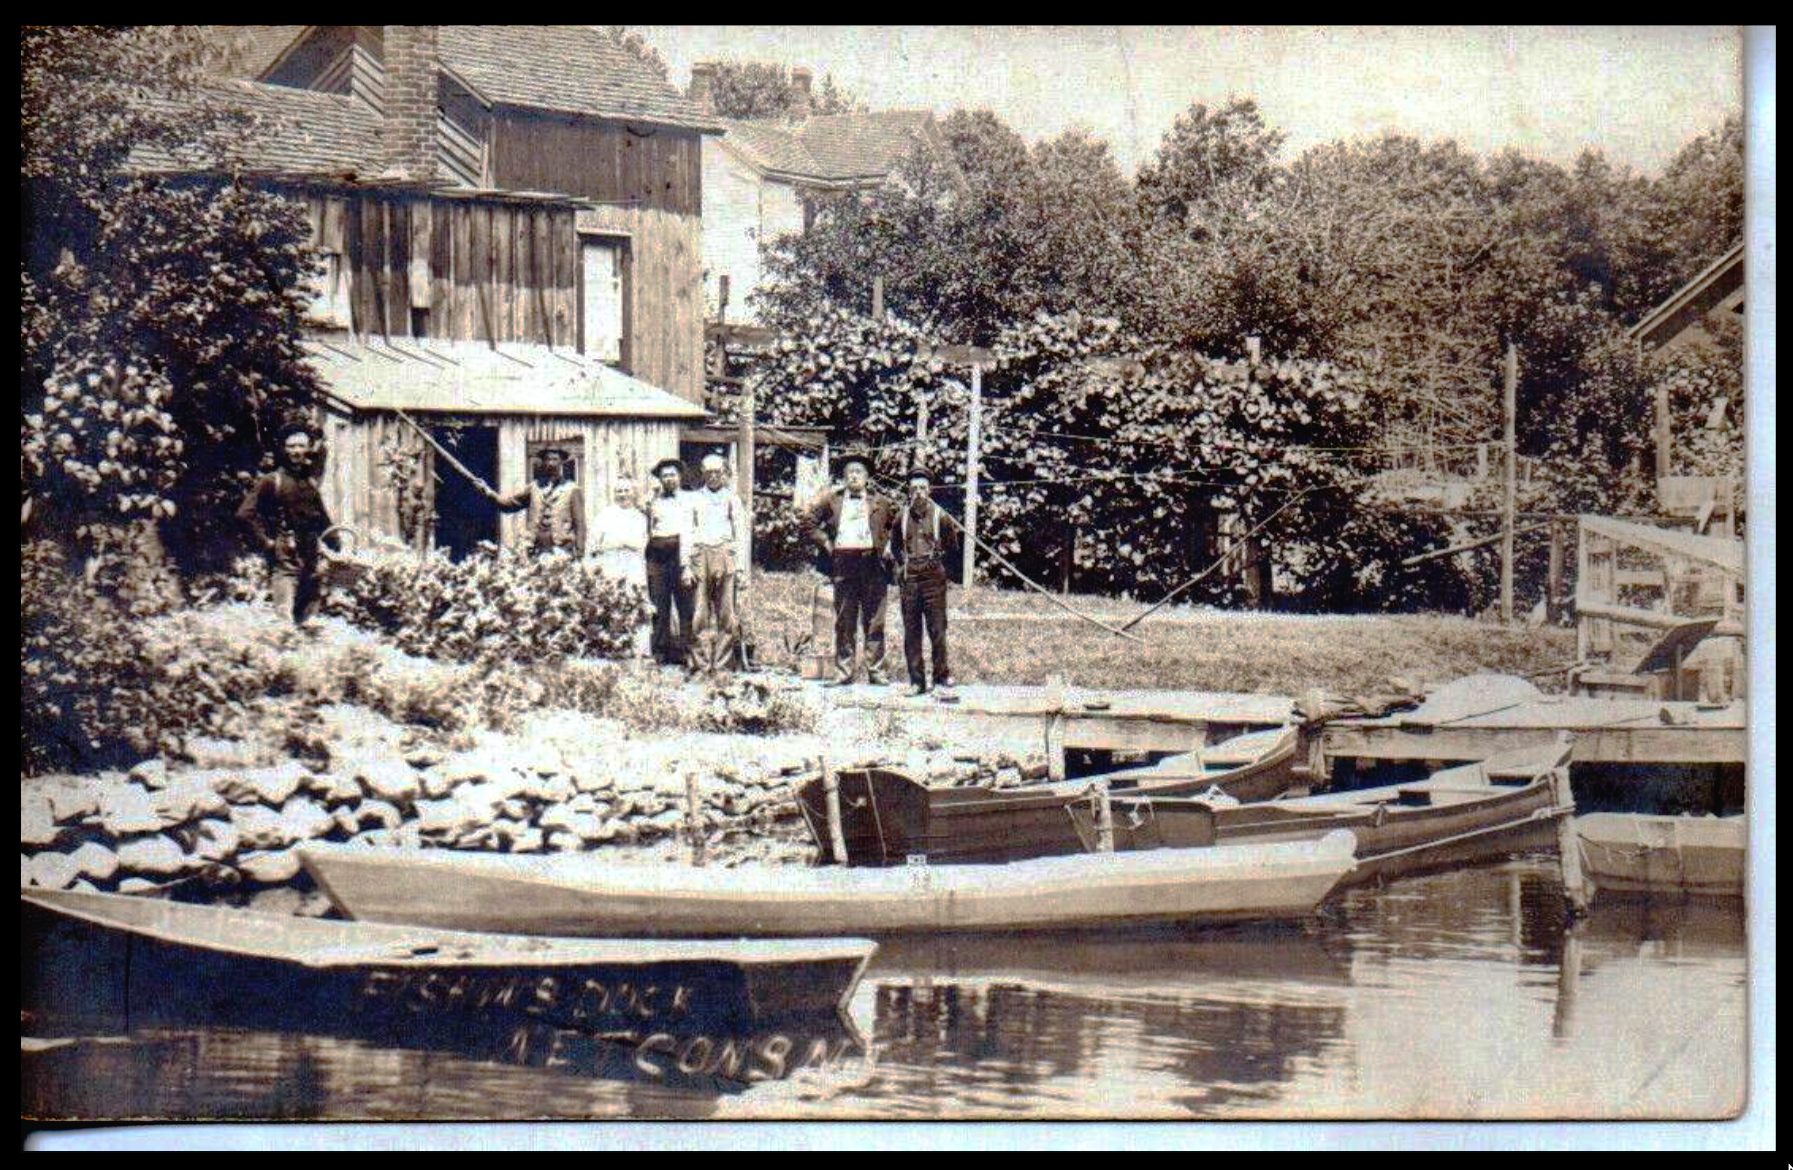 Stanhope = Fishing on the Morris Canal - c 1910